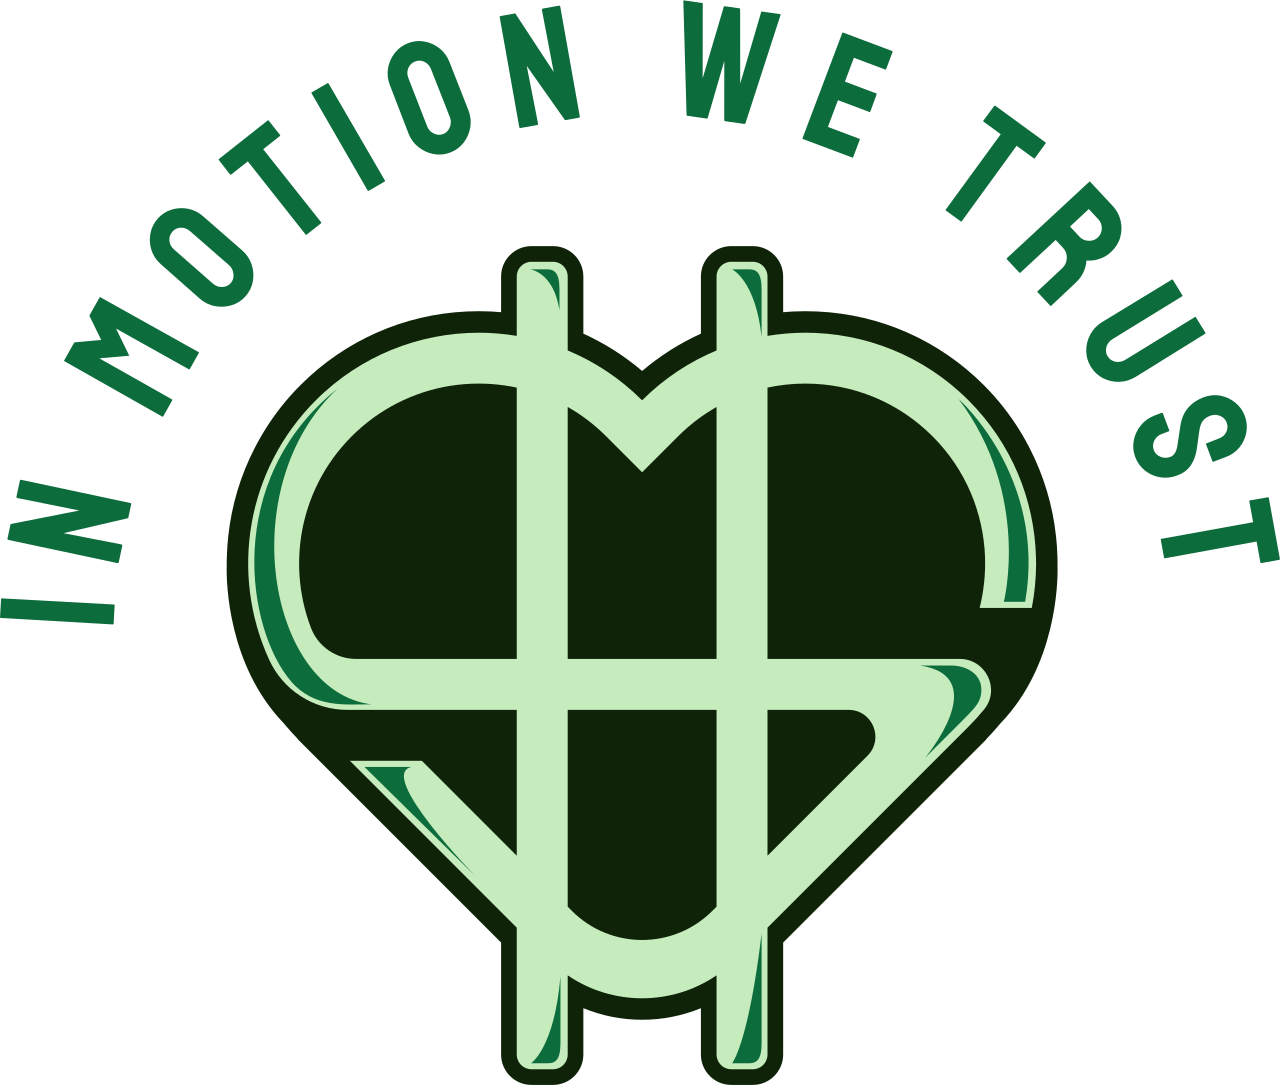 In motion we trust 's web page